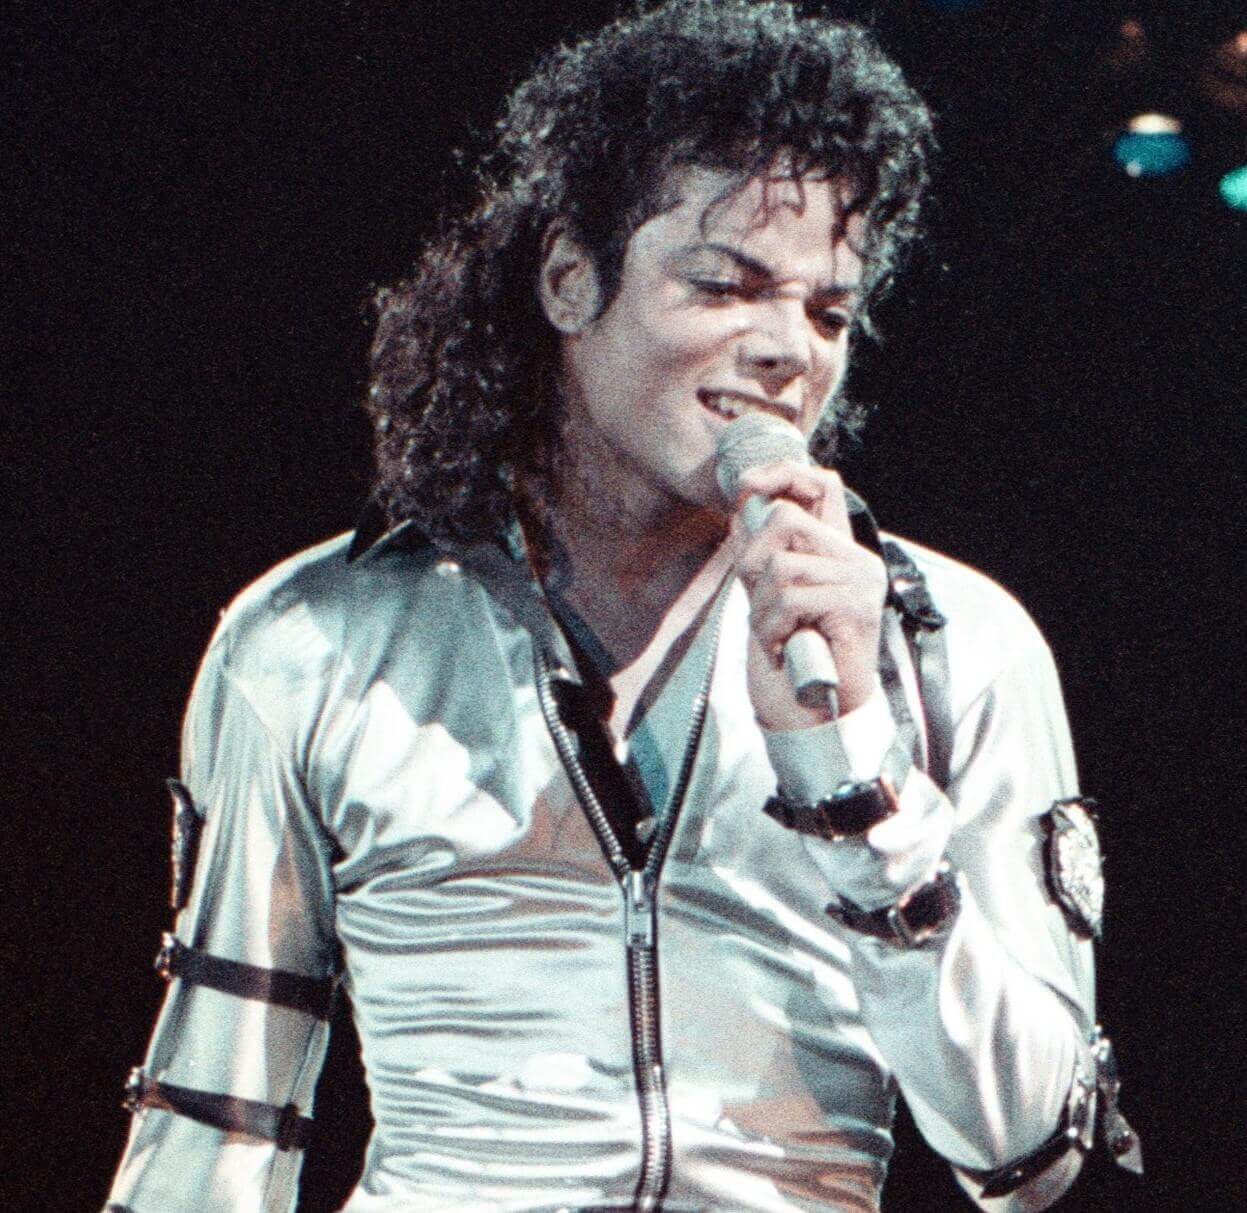 "Bad" singer Michael Jackson with a microphone